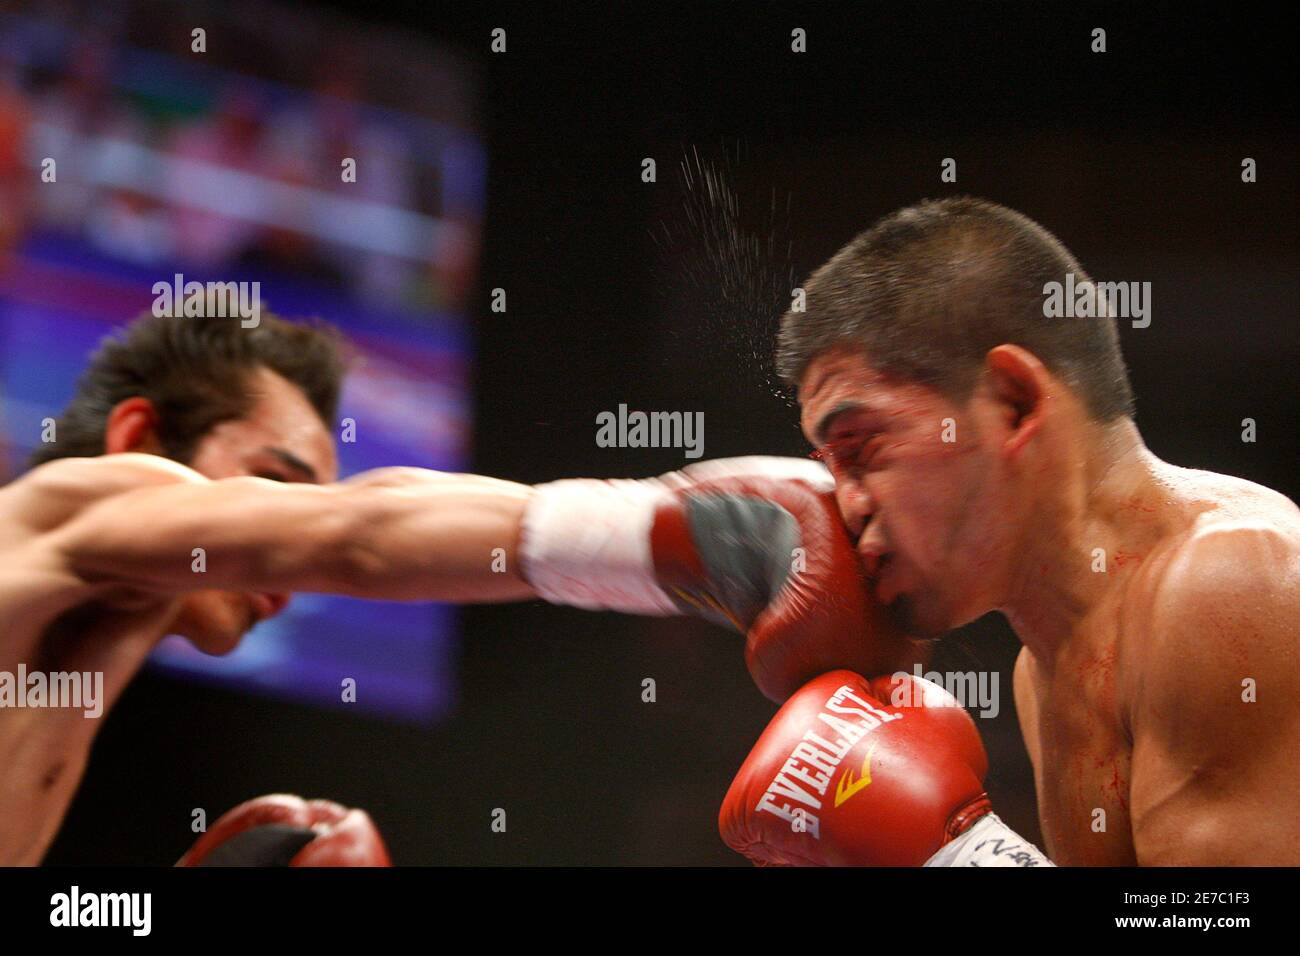 Nonito Donaire (L) of the Philippines lands a punch on Rafael Concepcion of Panama during their interim WBA super flyweight title bout at the Hard Rock Hotel & Casino in Las Vegas, Nevada, August 15, 2009. Donaire won the title by unanimous decision. REUTERS/Steve Marcus (UNITED STATES SPORT BOXING) Stock Photo